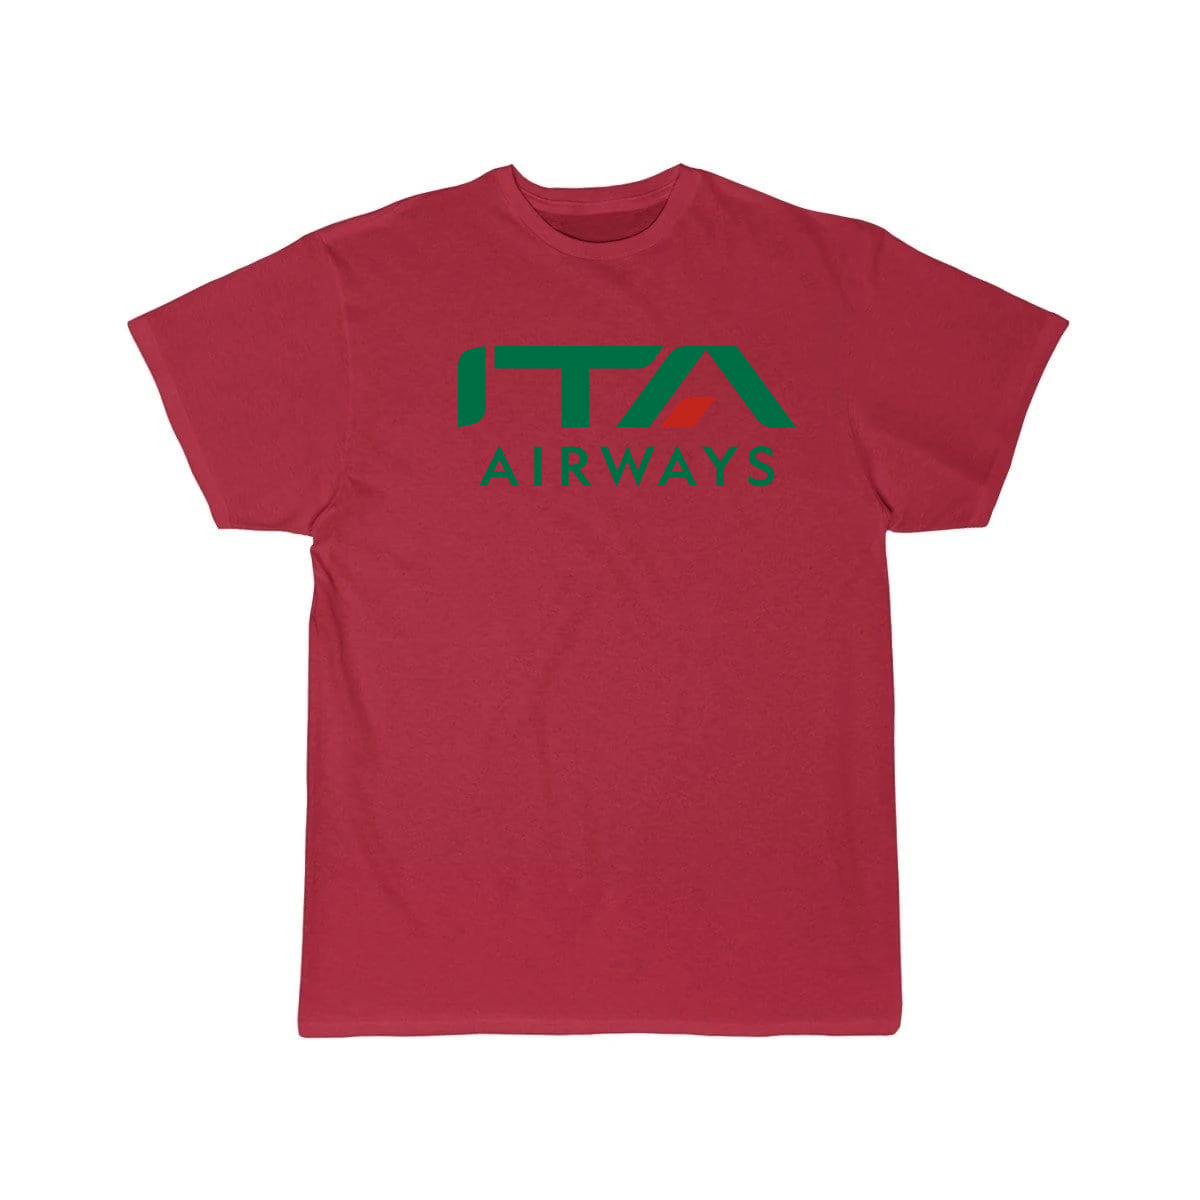 ITALY AIRLINE T-SHIRT